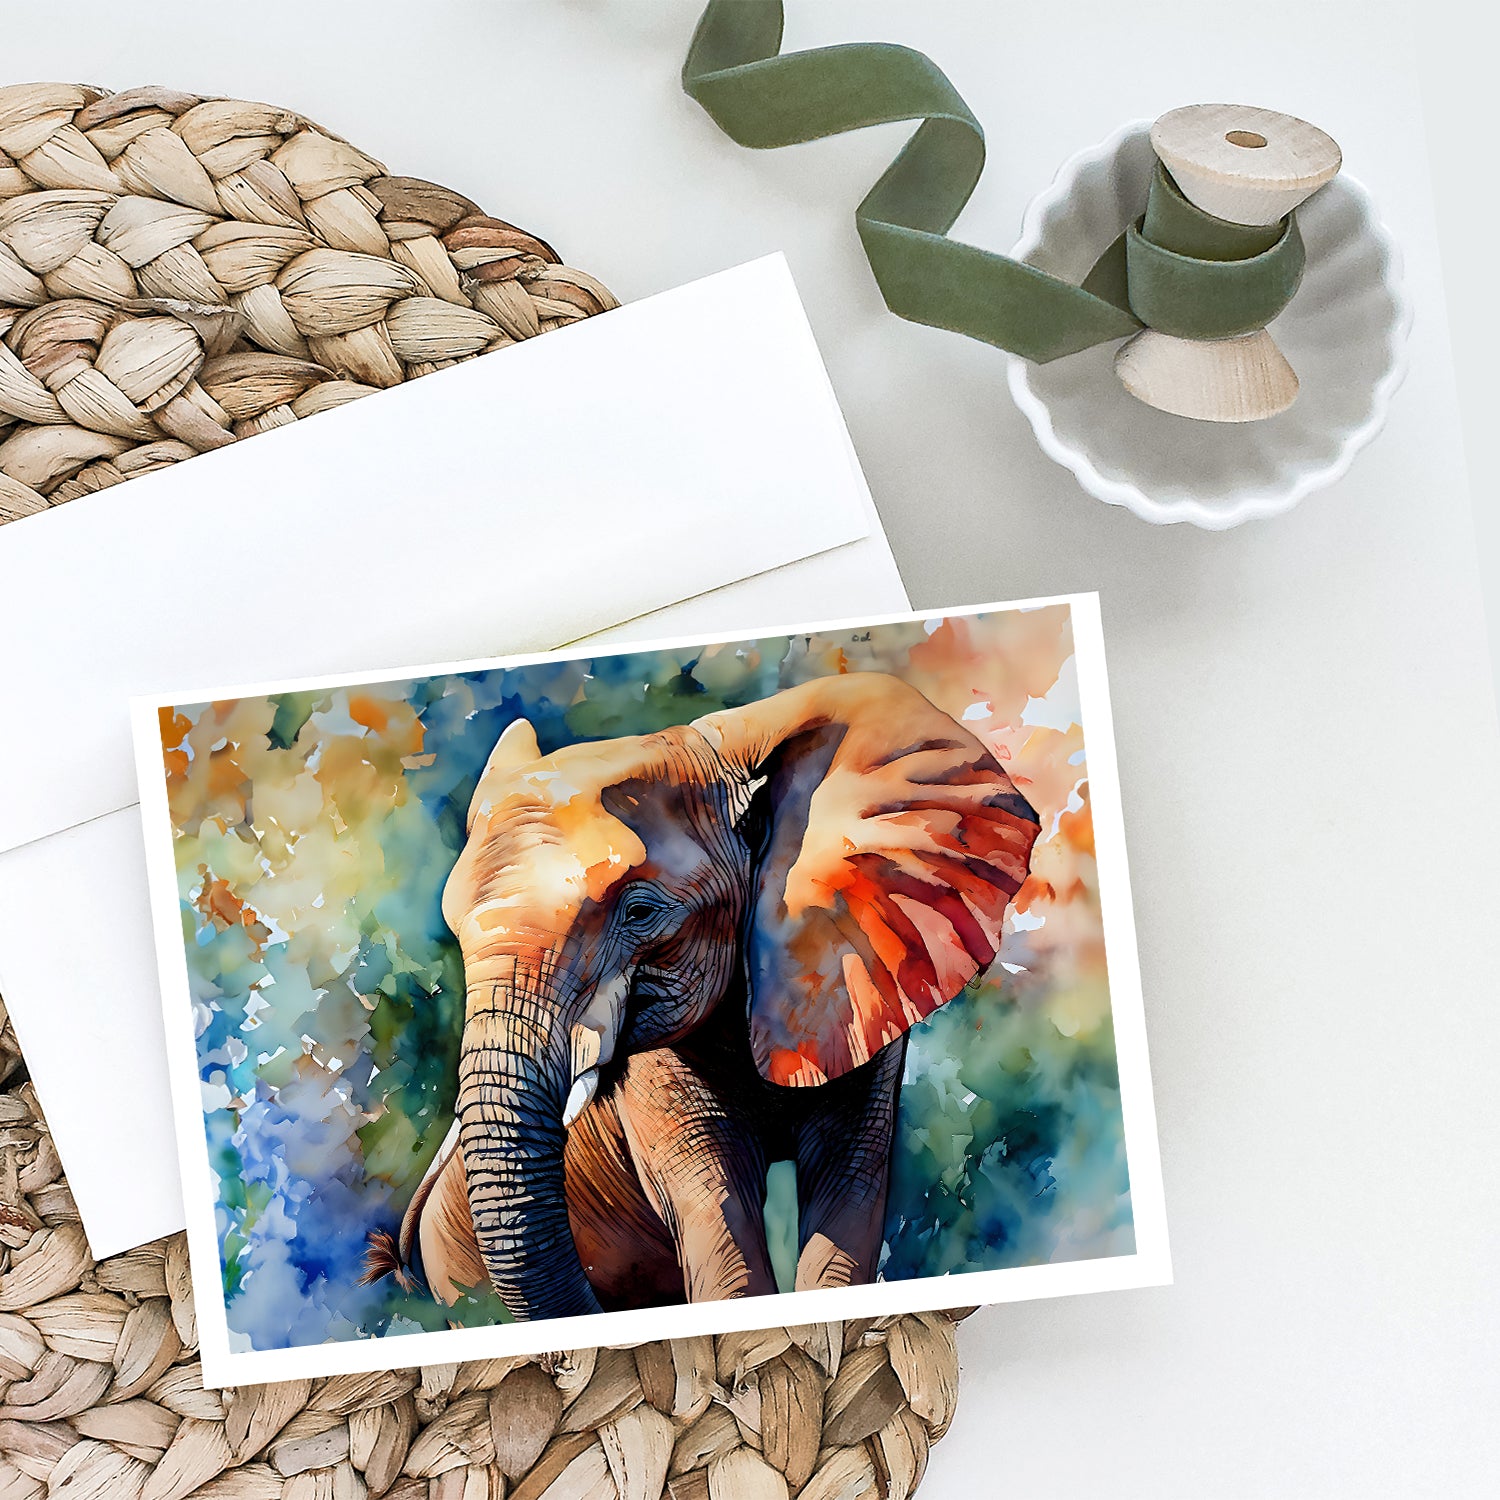 Buy this Elephant Greeting Cards Pack of 8